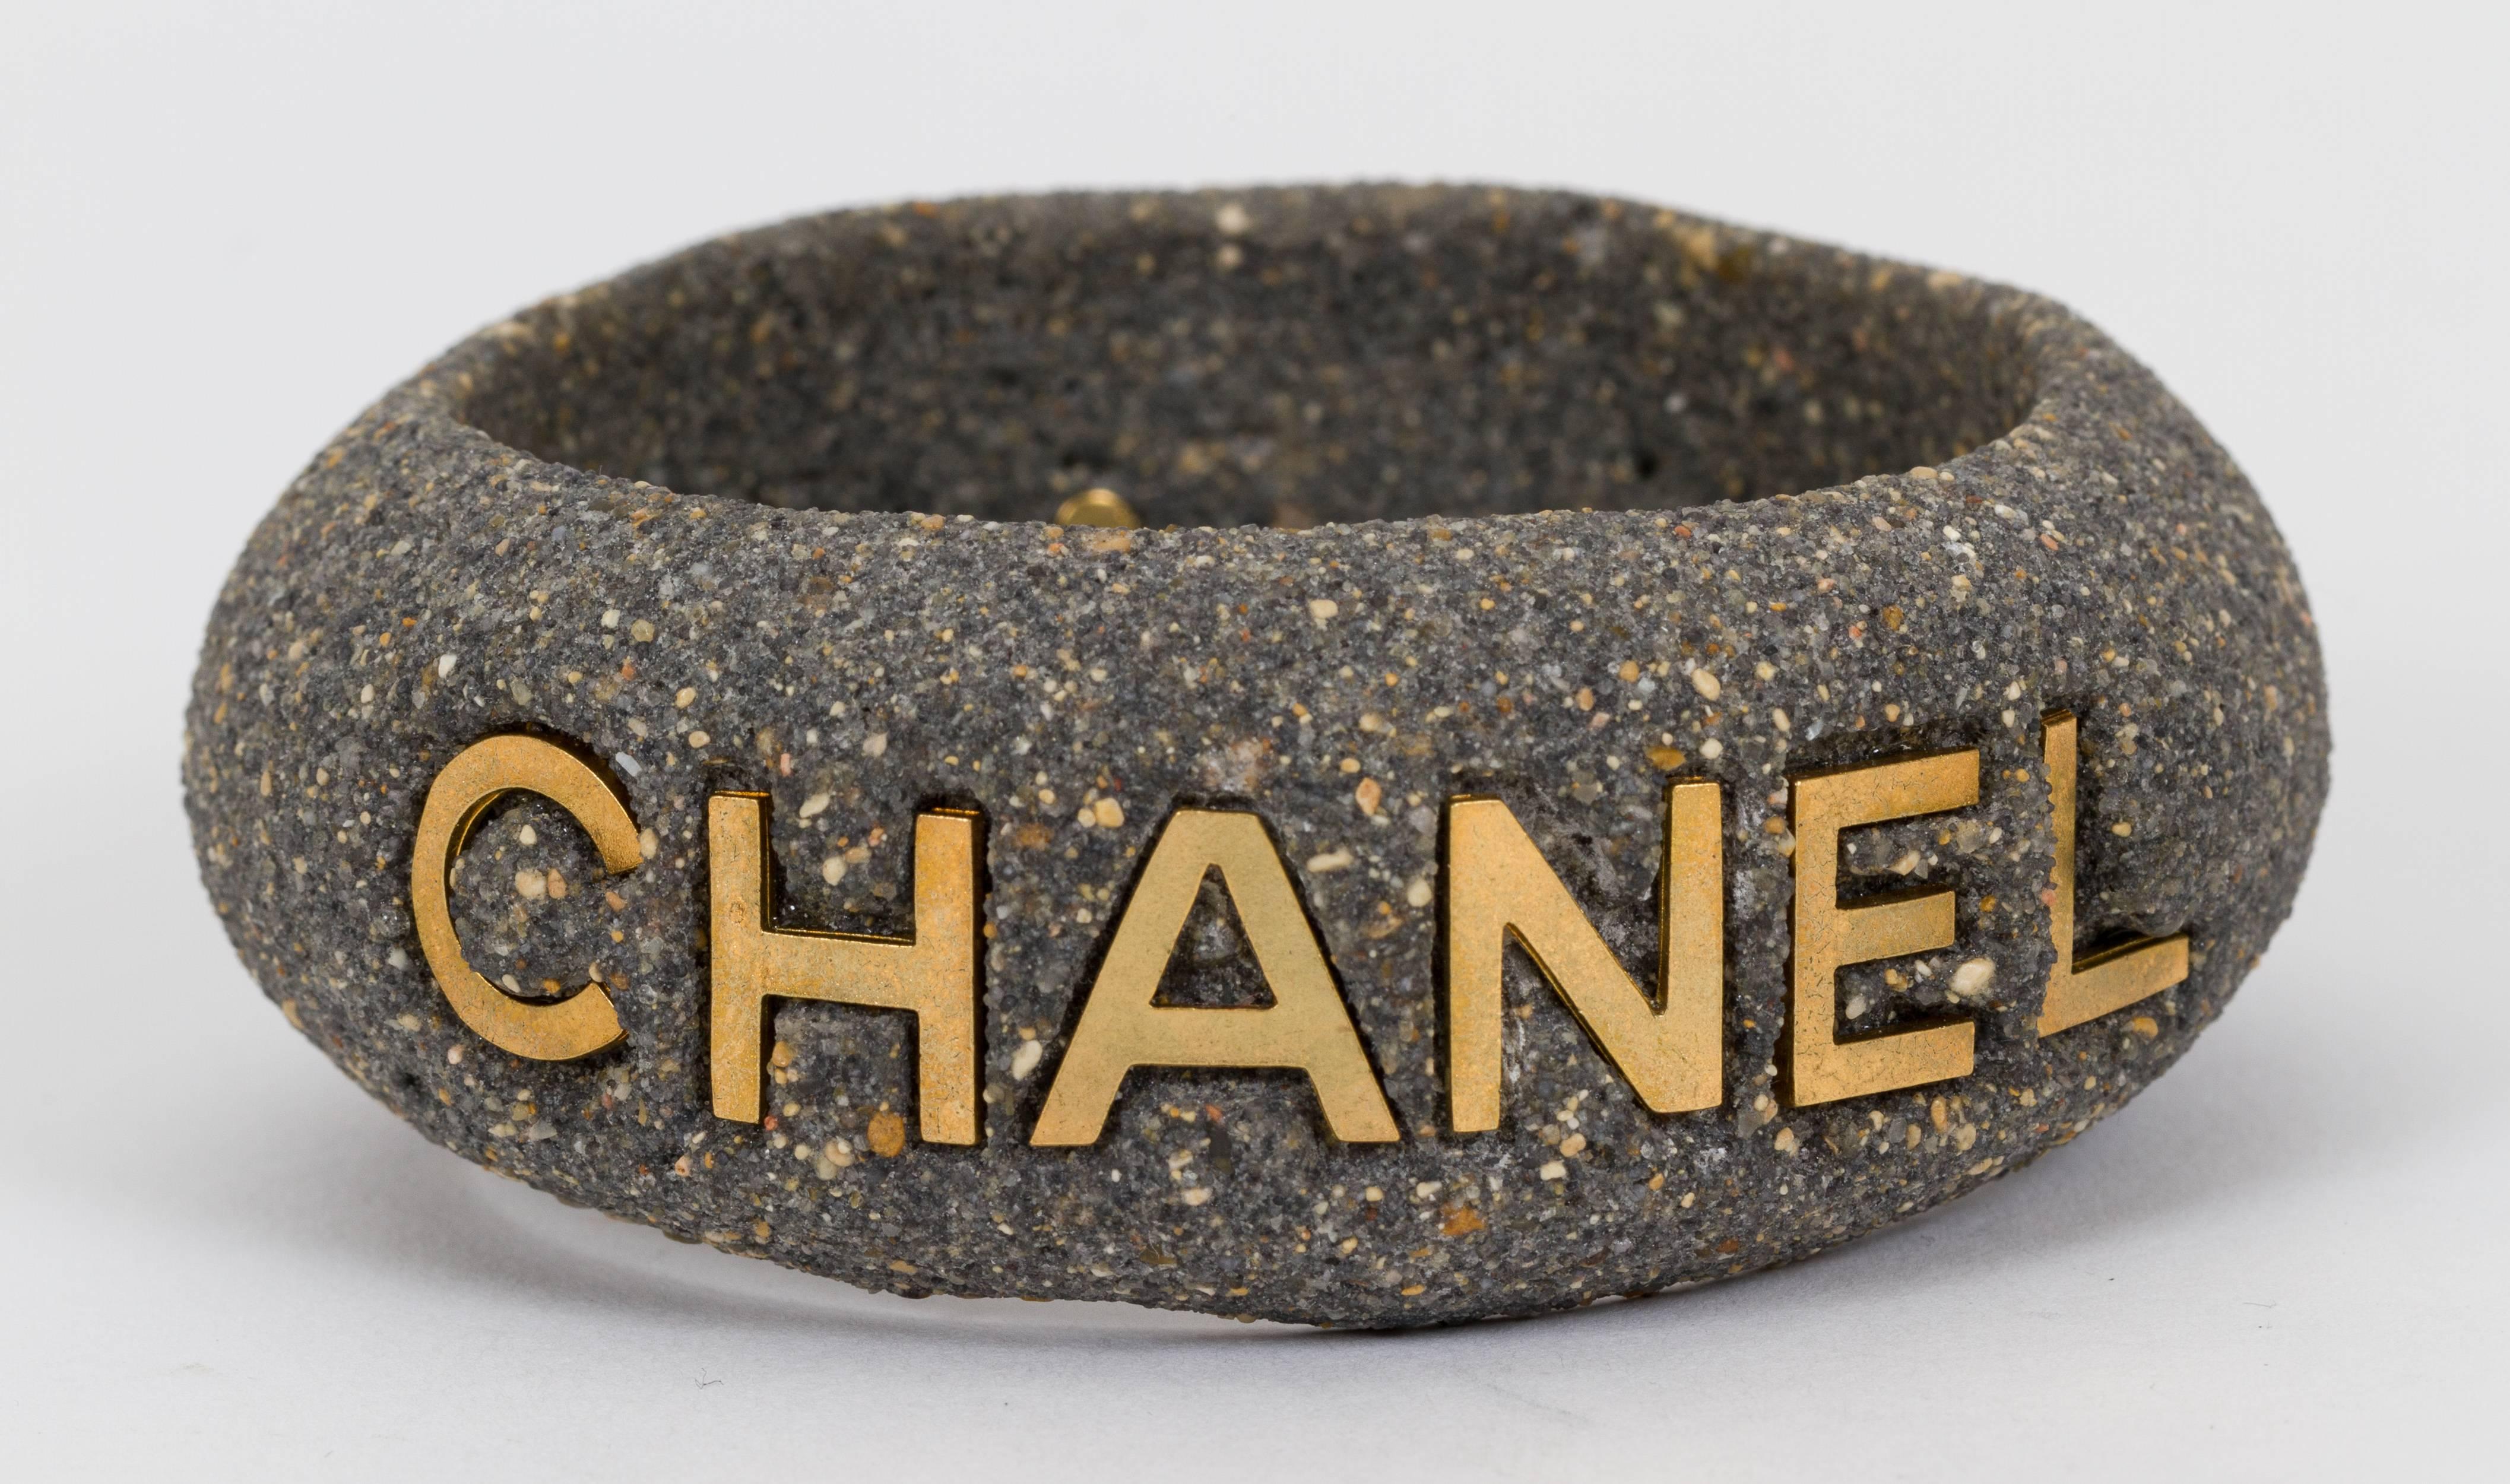 Chanle grey stone carved bangle bracelet with Chanel Paris gold lettering. Collection spring 1994. Comes with velvet pouch. 2.5